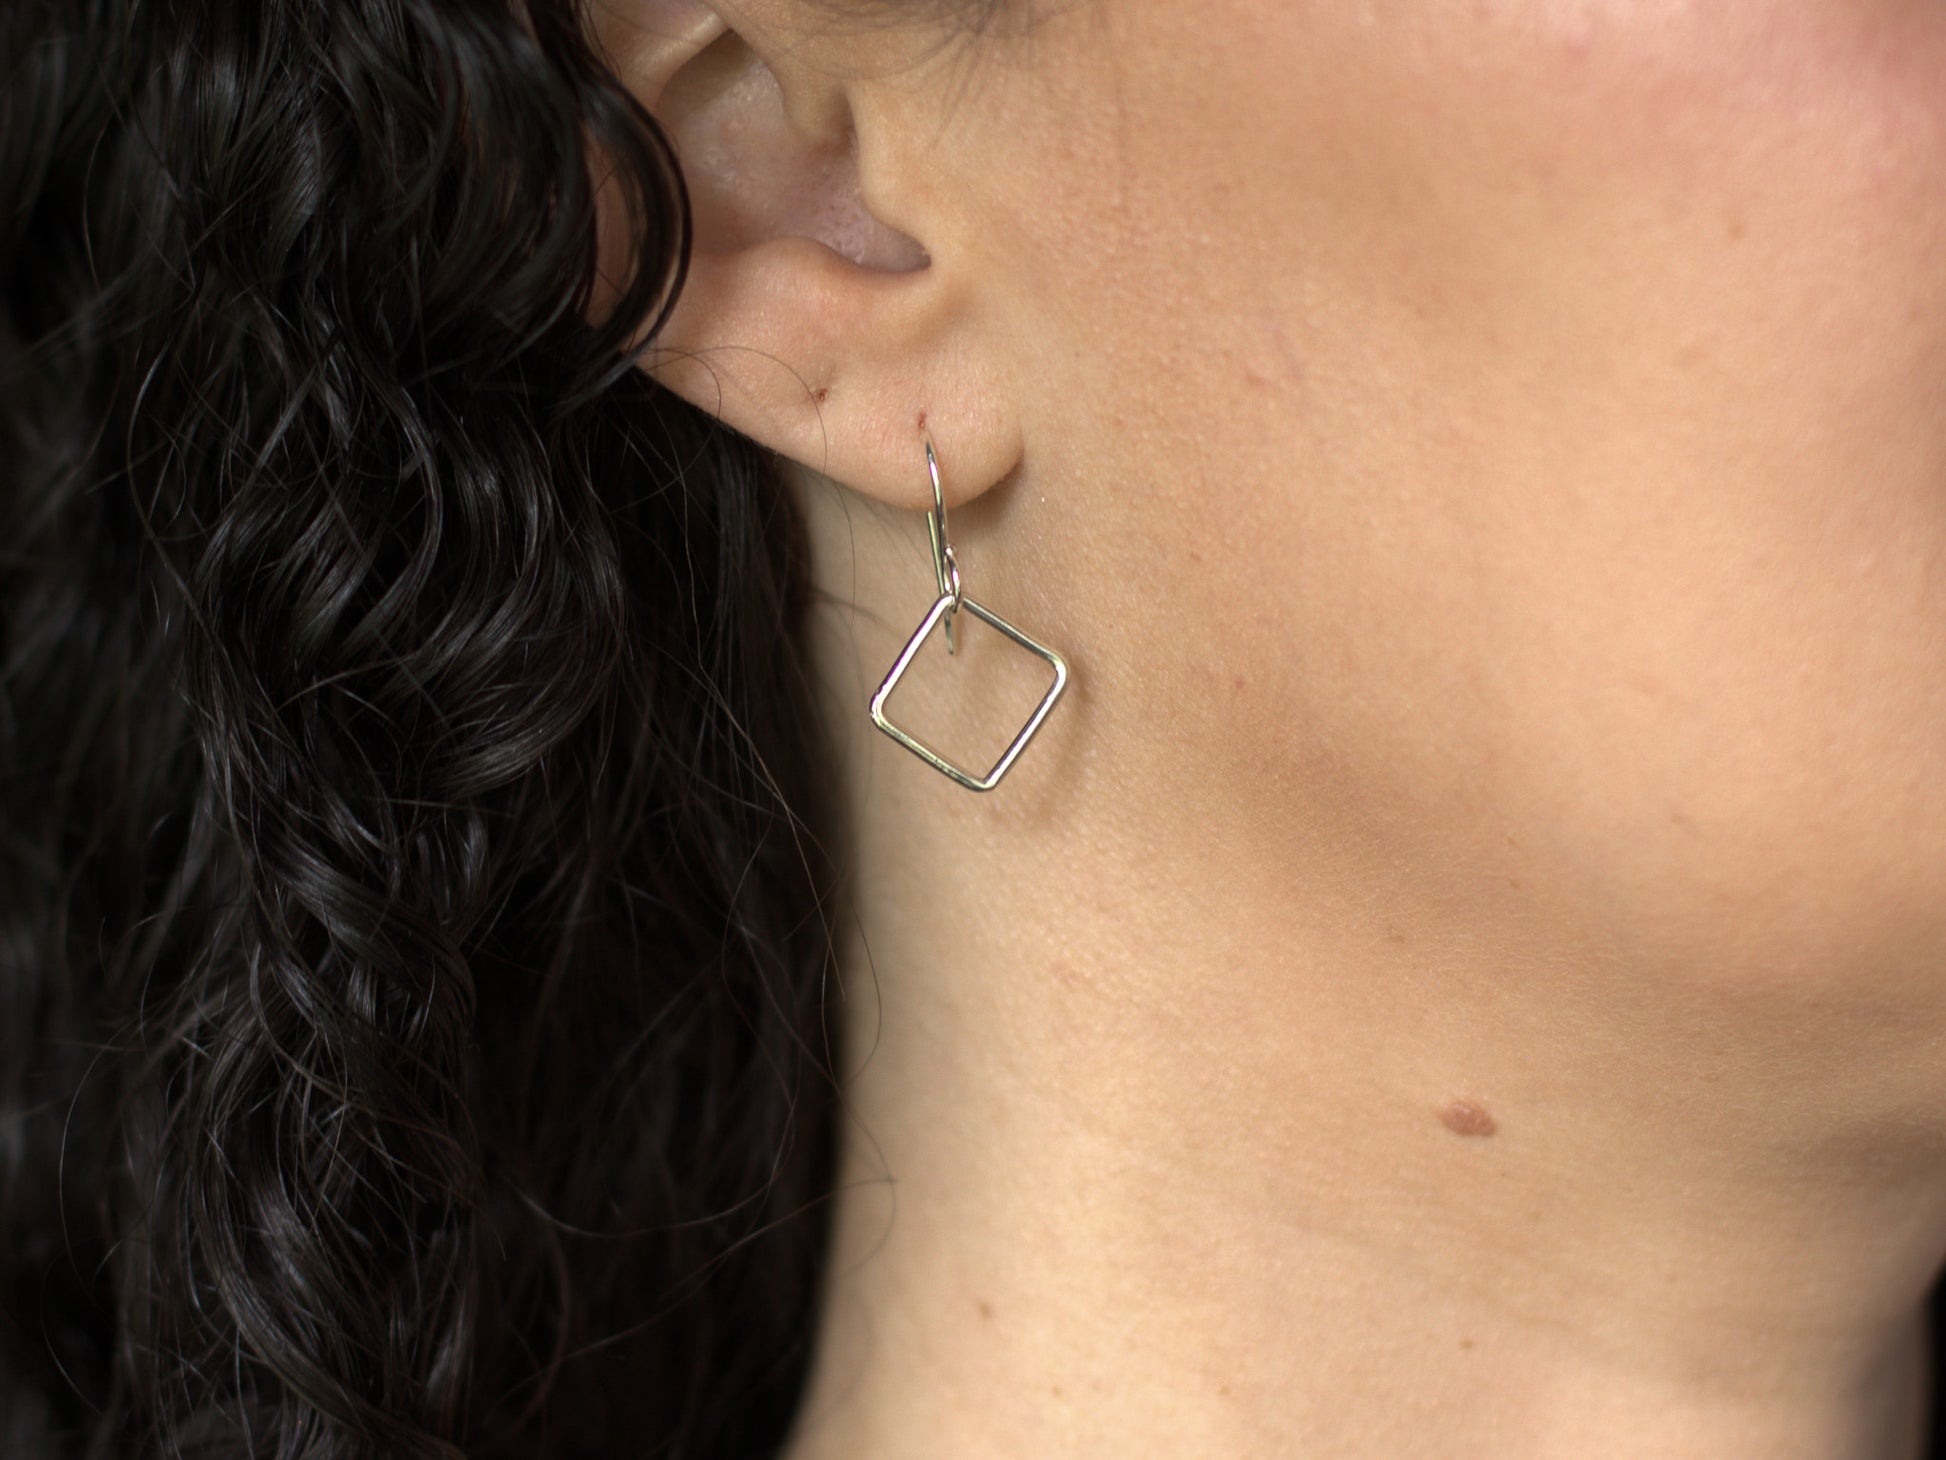 Practice Mindful Breathwork with our Box Breathing jewelry Earrings